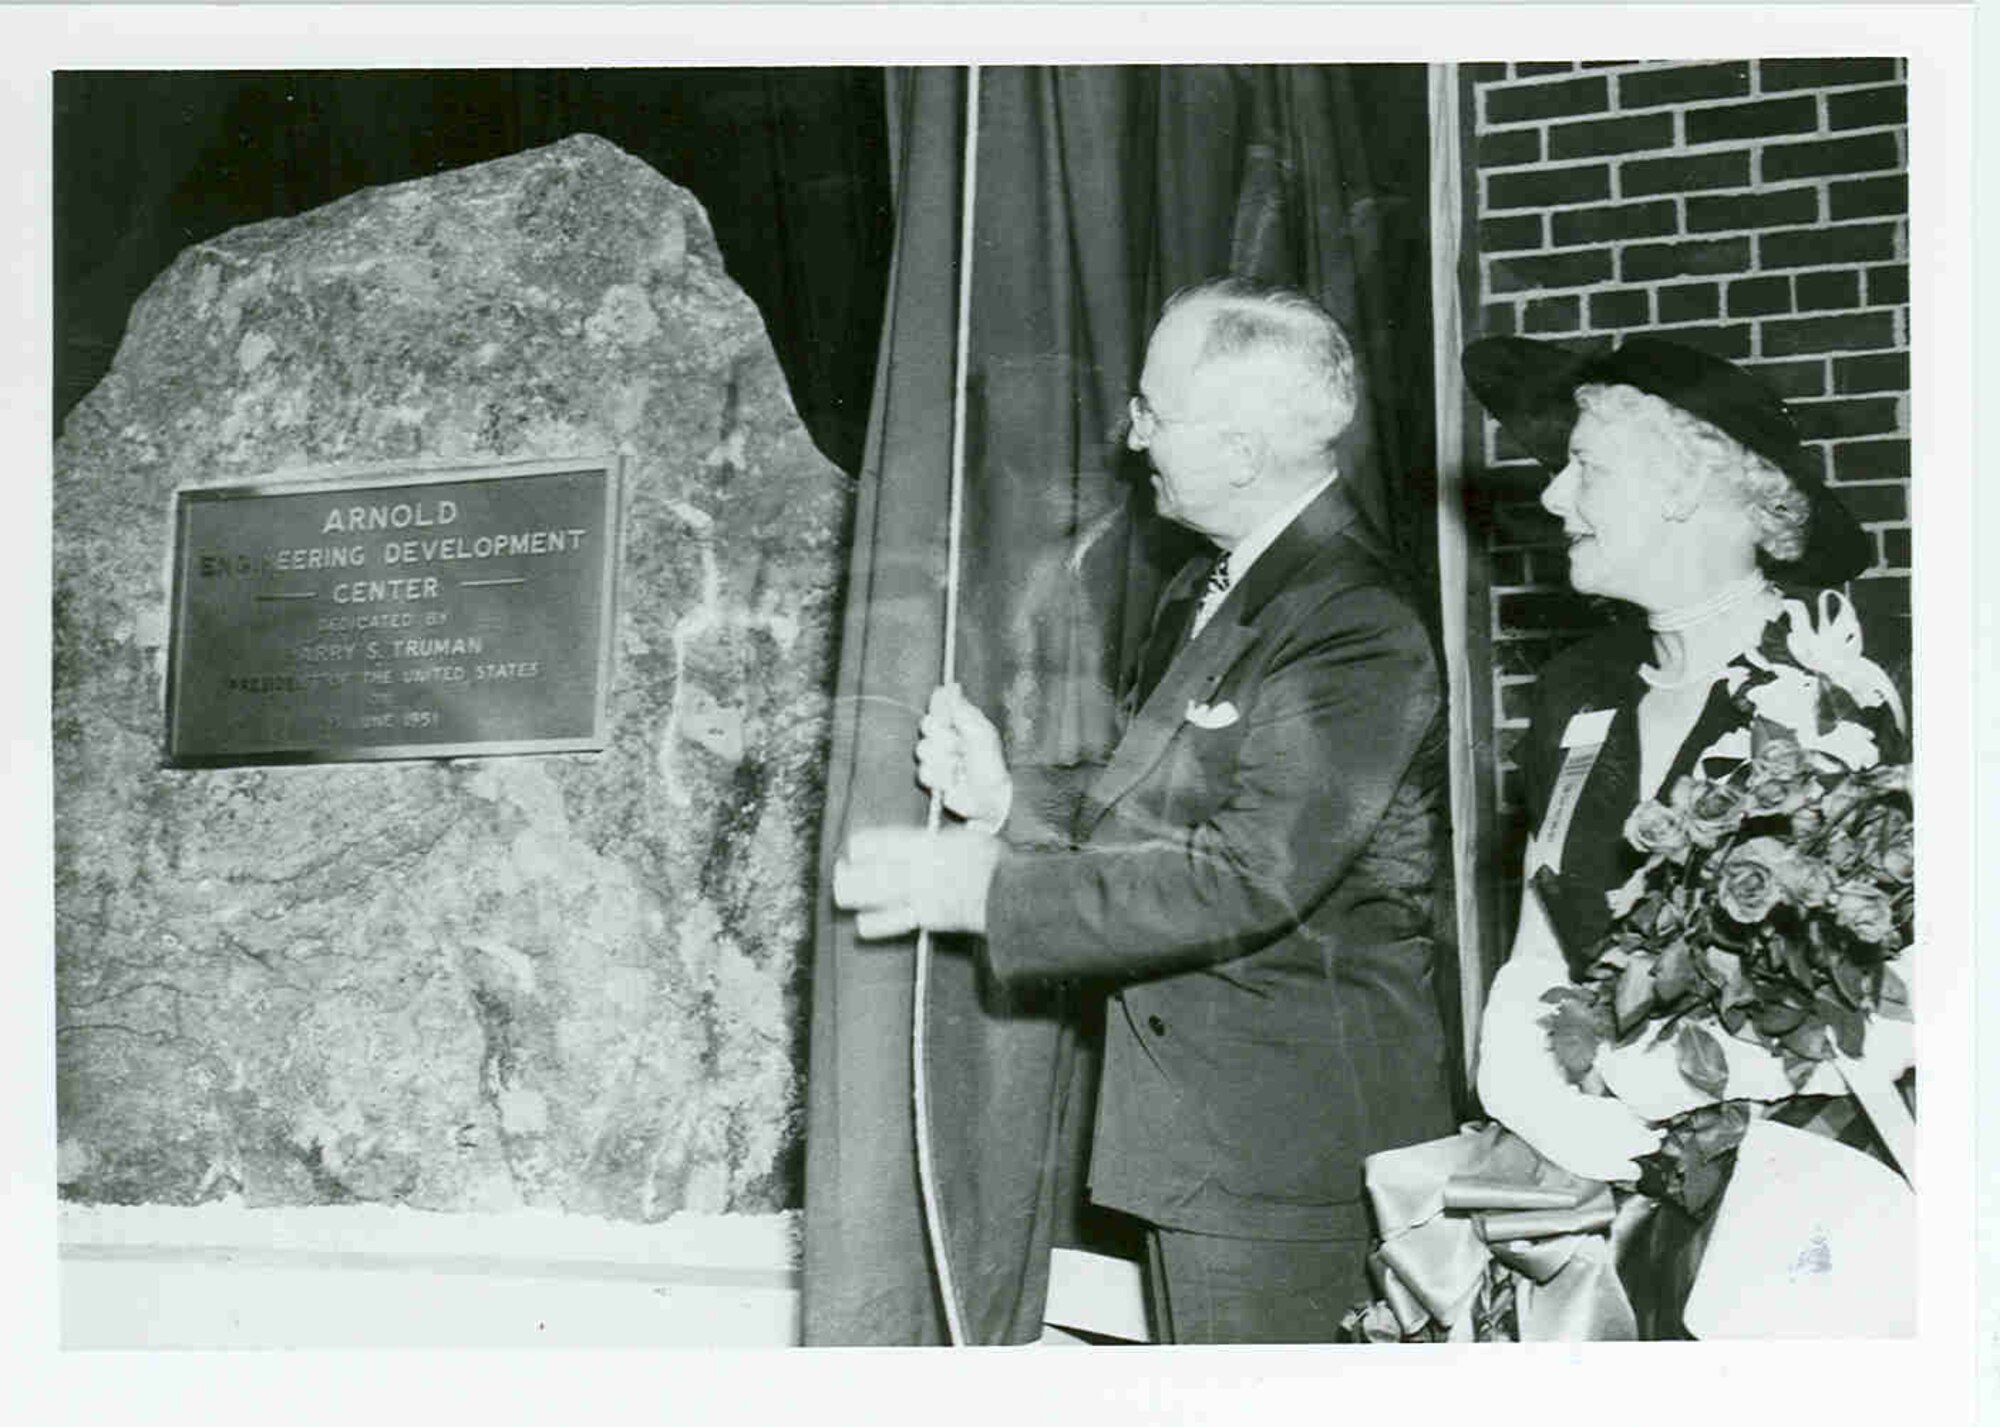 During a June 25, 1951, ceremony at Arnold Air Force Base, President Harry Truman draws aside the curtain to reveal a dedicatory plaque mounted to a granite rock. The ceremony was held to dedicate the Air Engineering Development Center as the Arnold Engineering Development Center in honor of Gen. Henry H. “Hap” Arnold, who had passed away before the ceremony and whose vision was instrumental in bringing the center to fruition. Pictured with Truman is Arnold’s widow, Bee. It was 70 years ago this month that Truman signed into law the bills that allowed for the establishment of AEDC. (U.S. Air Force photo)